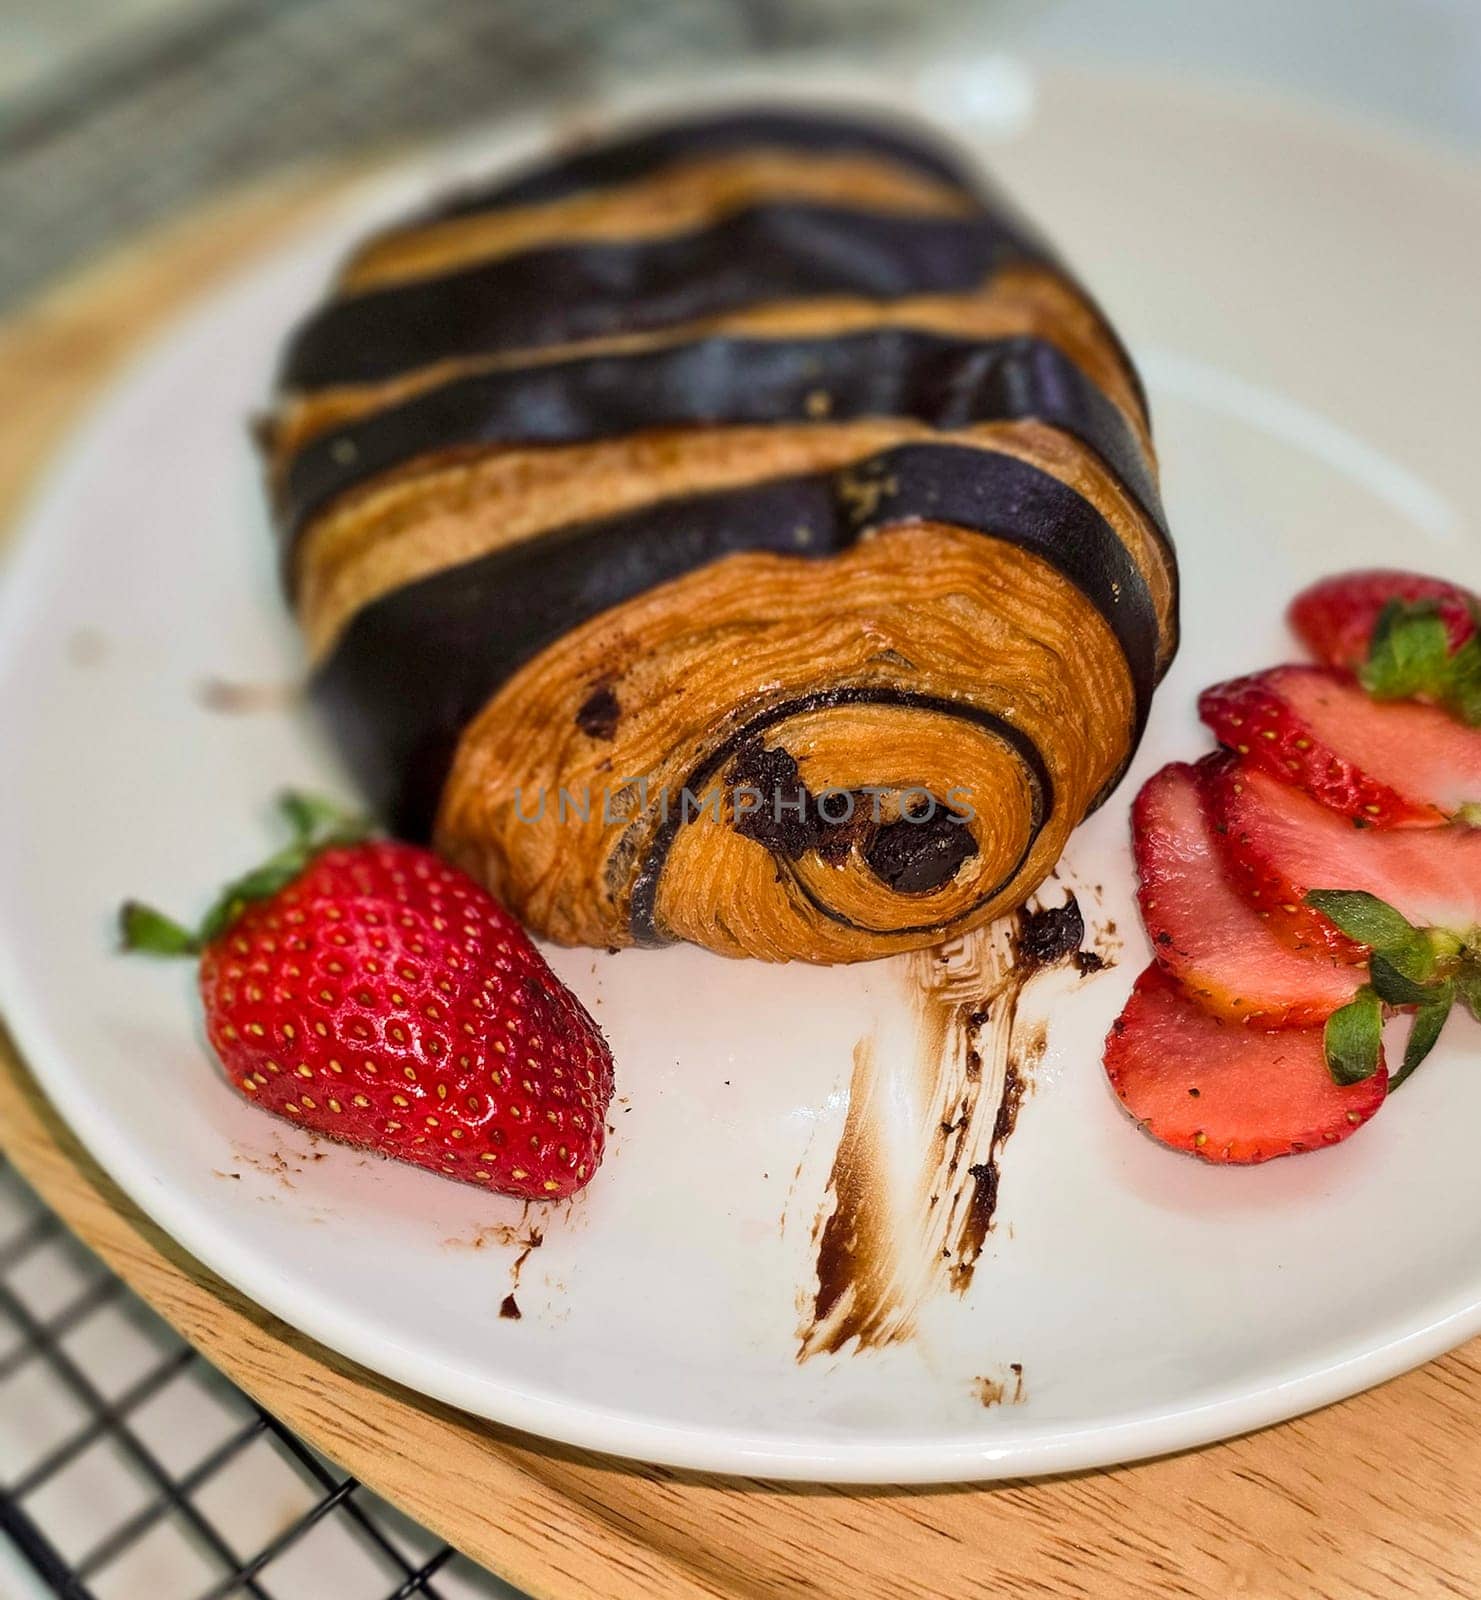 Fresh homemade striped chocolate croissant with chocolate filling on a round white plate, served with fresh strawberry, good cooking ideas